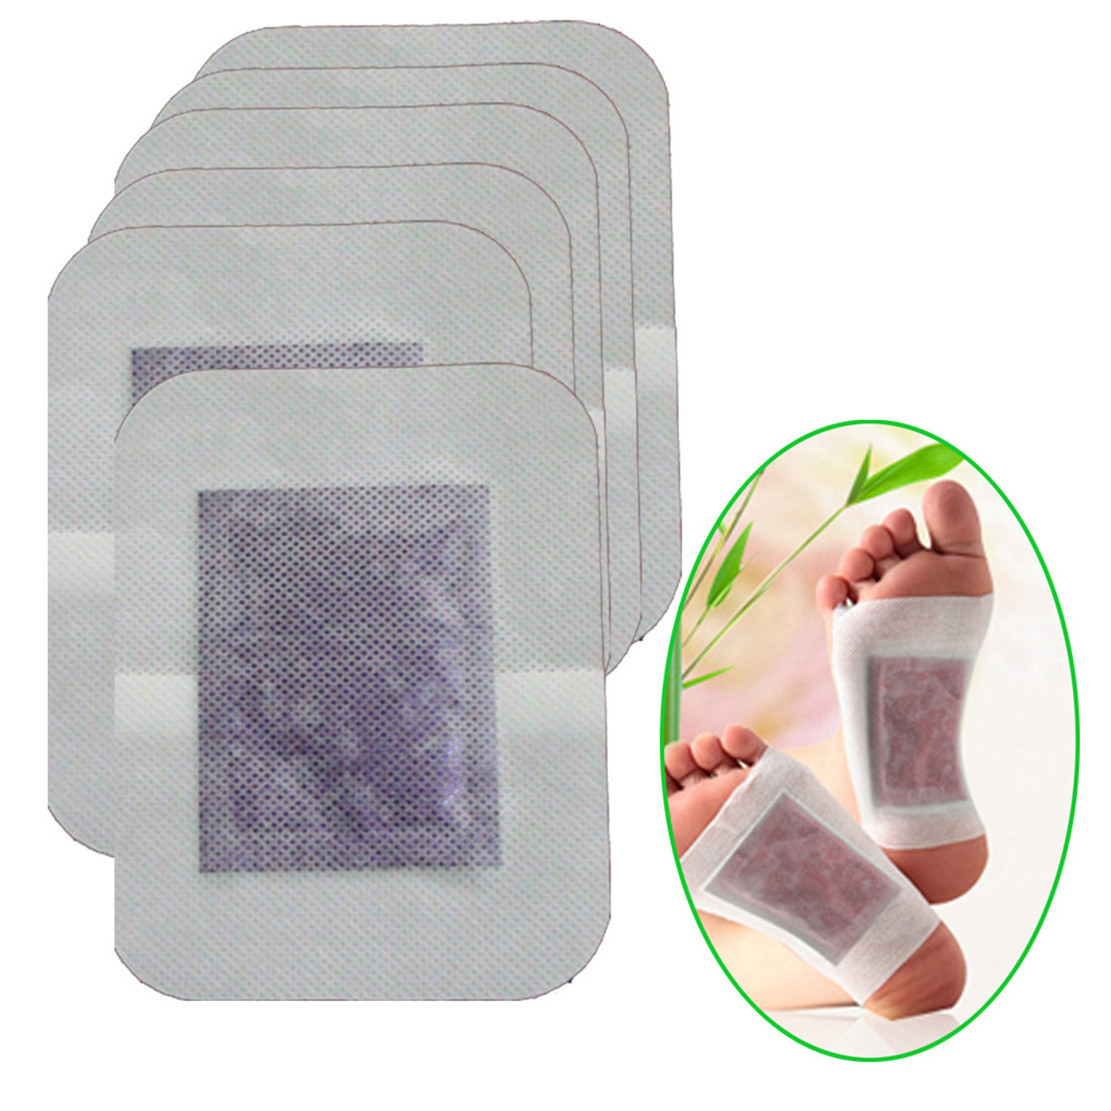 Wholesale Bamboo detox foot patch with adhesive is the best Chinese herb foot detox pad from china suppliers